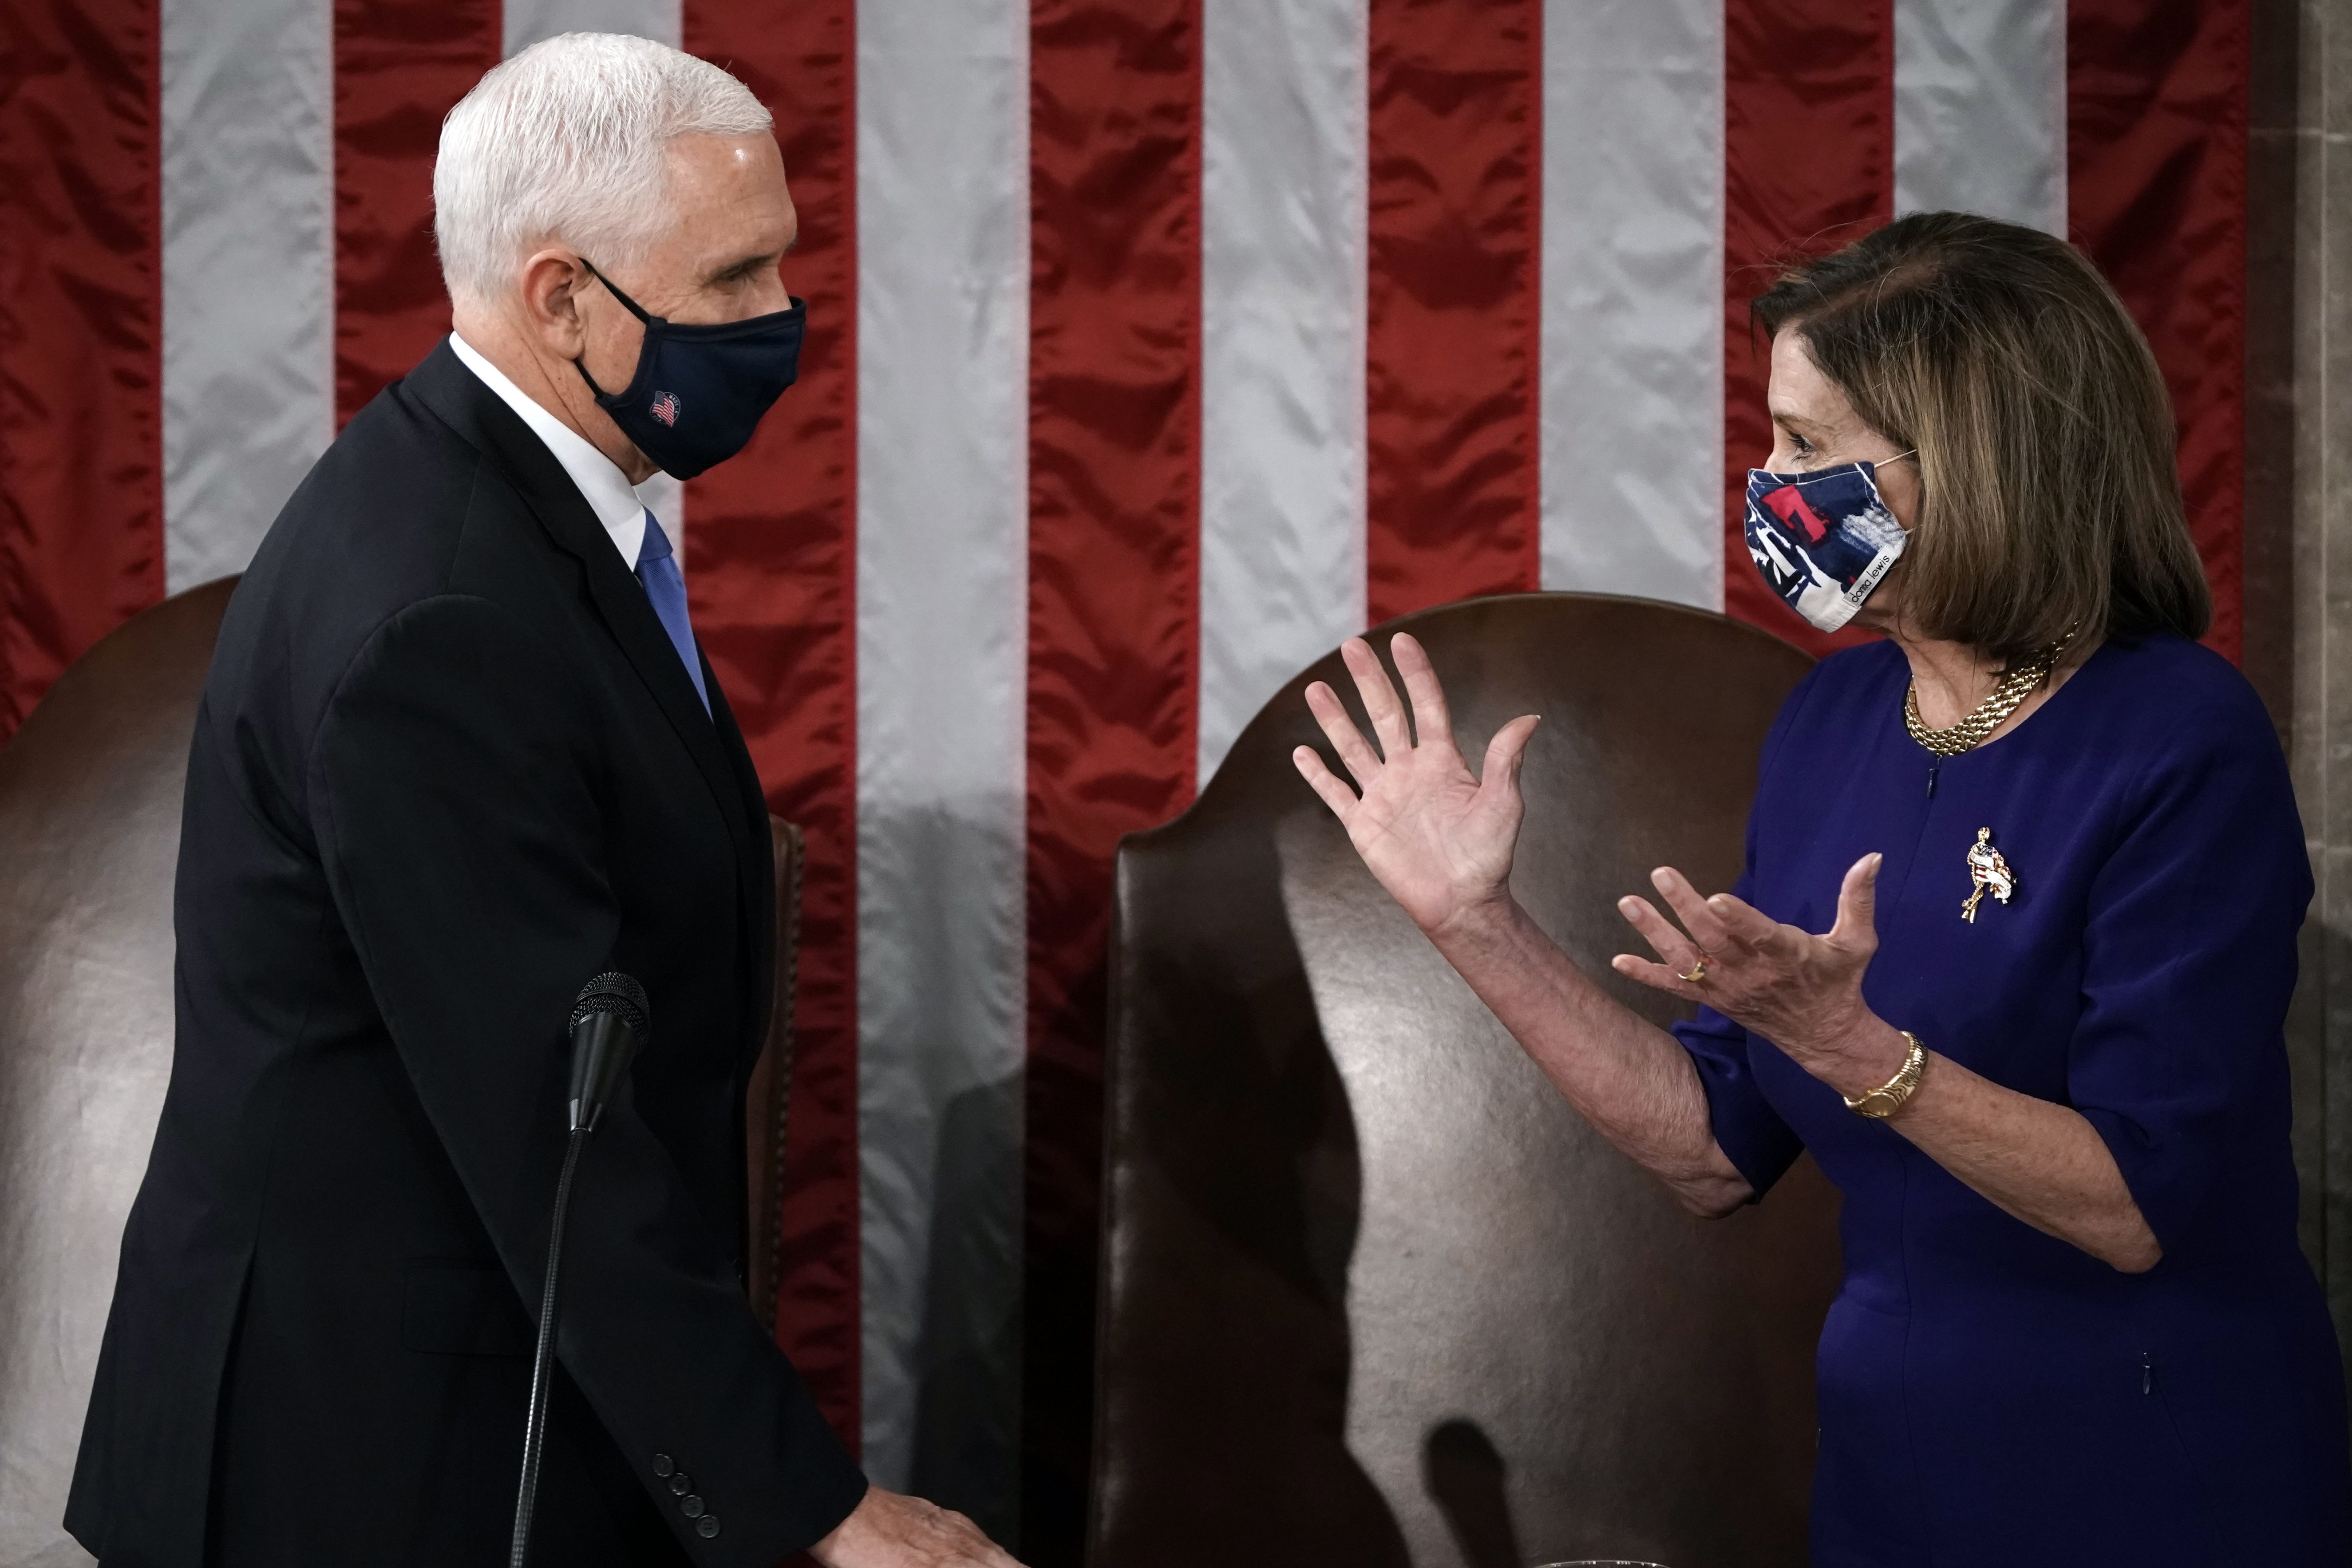 Vice President Pence talks with House Speaker Nancy Pelosi before the start of today's Joint Session.